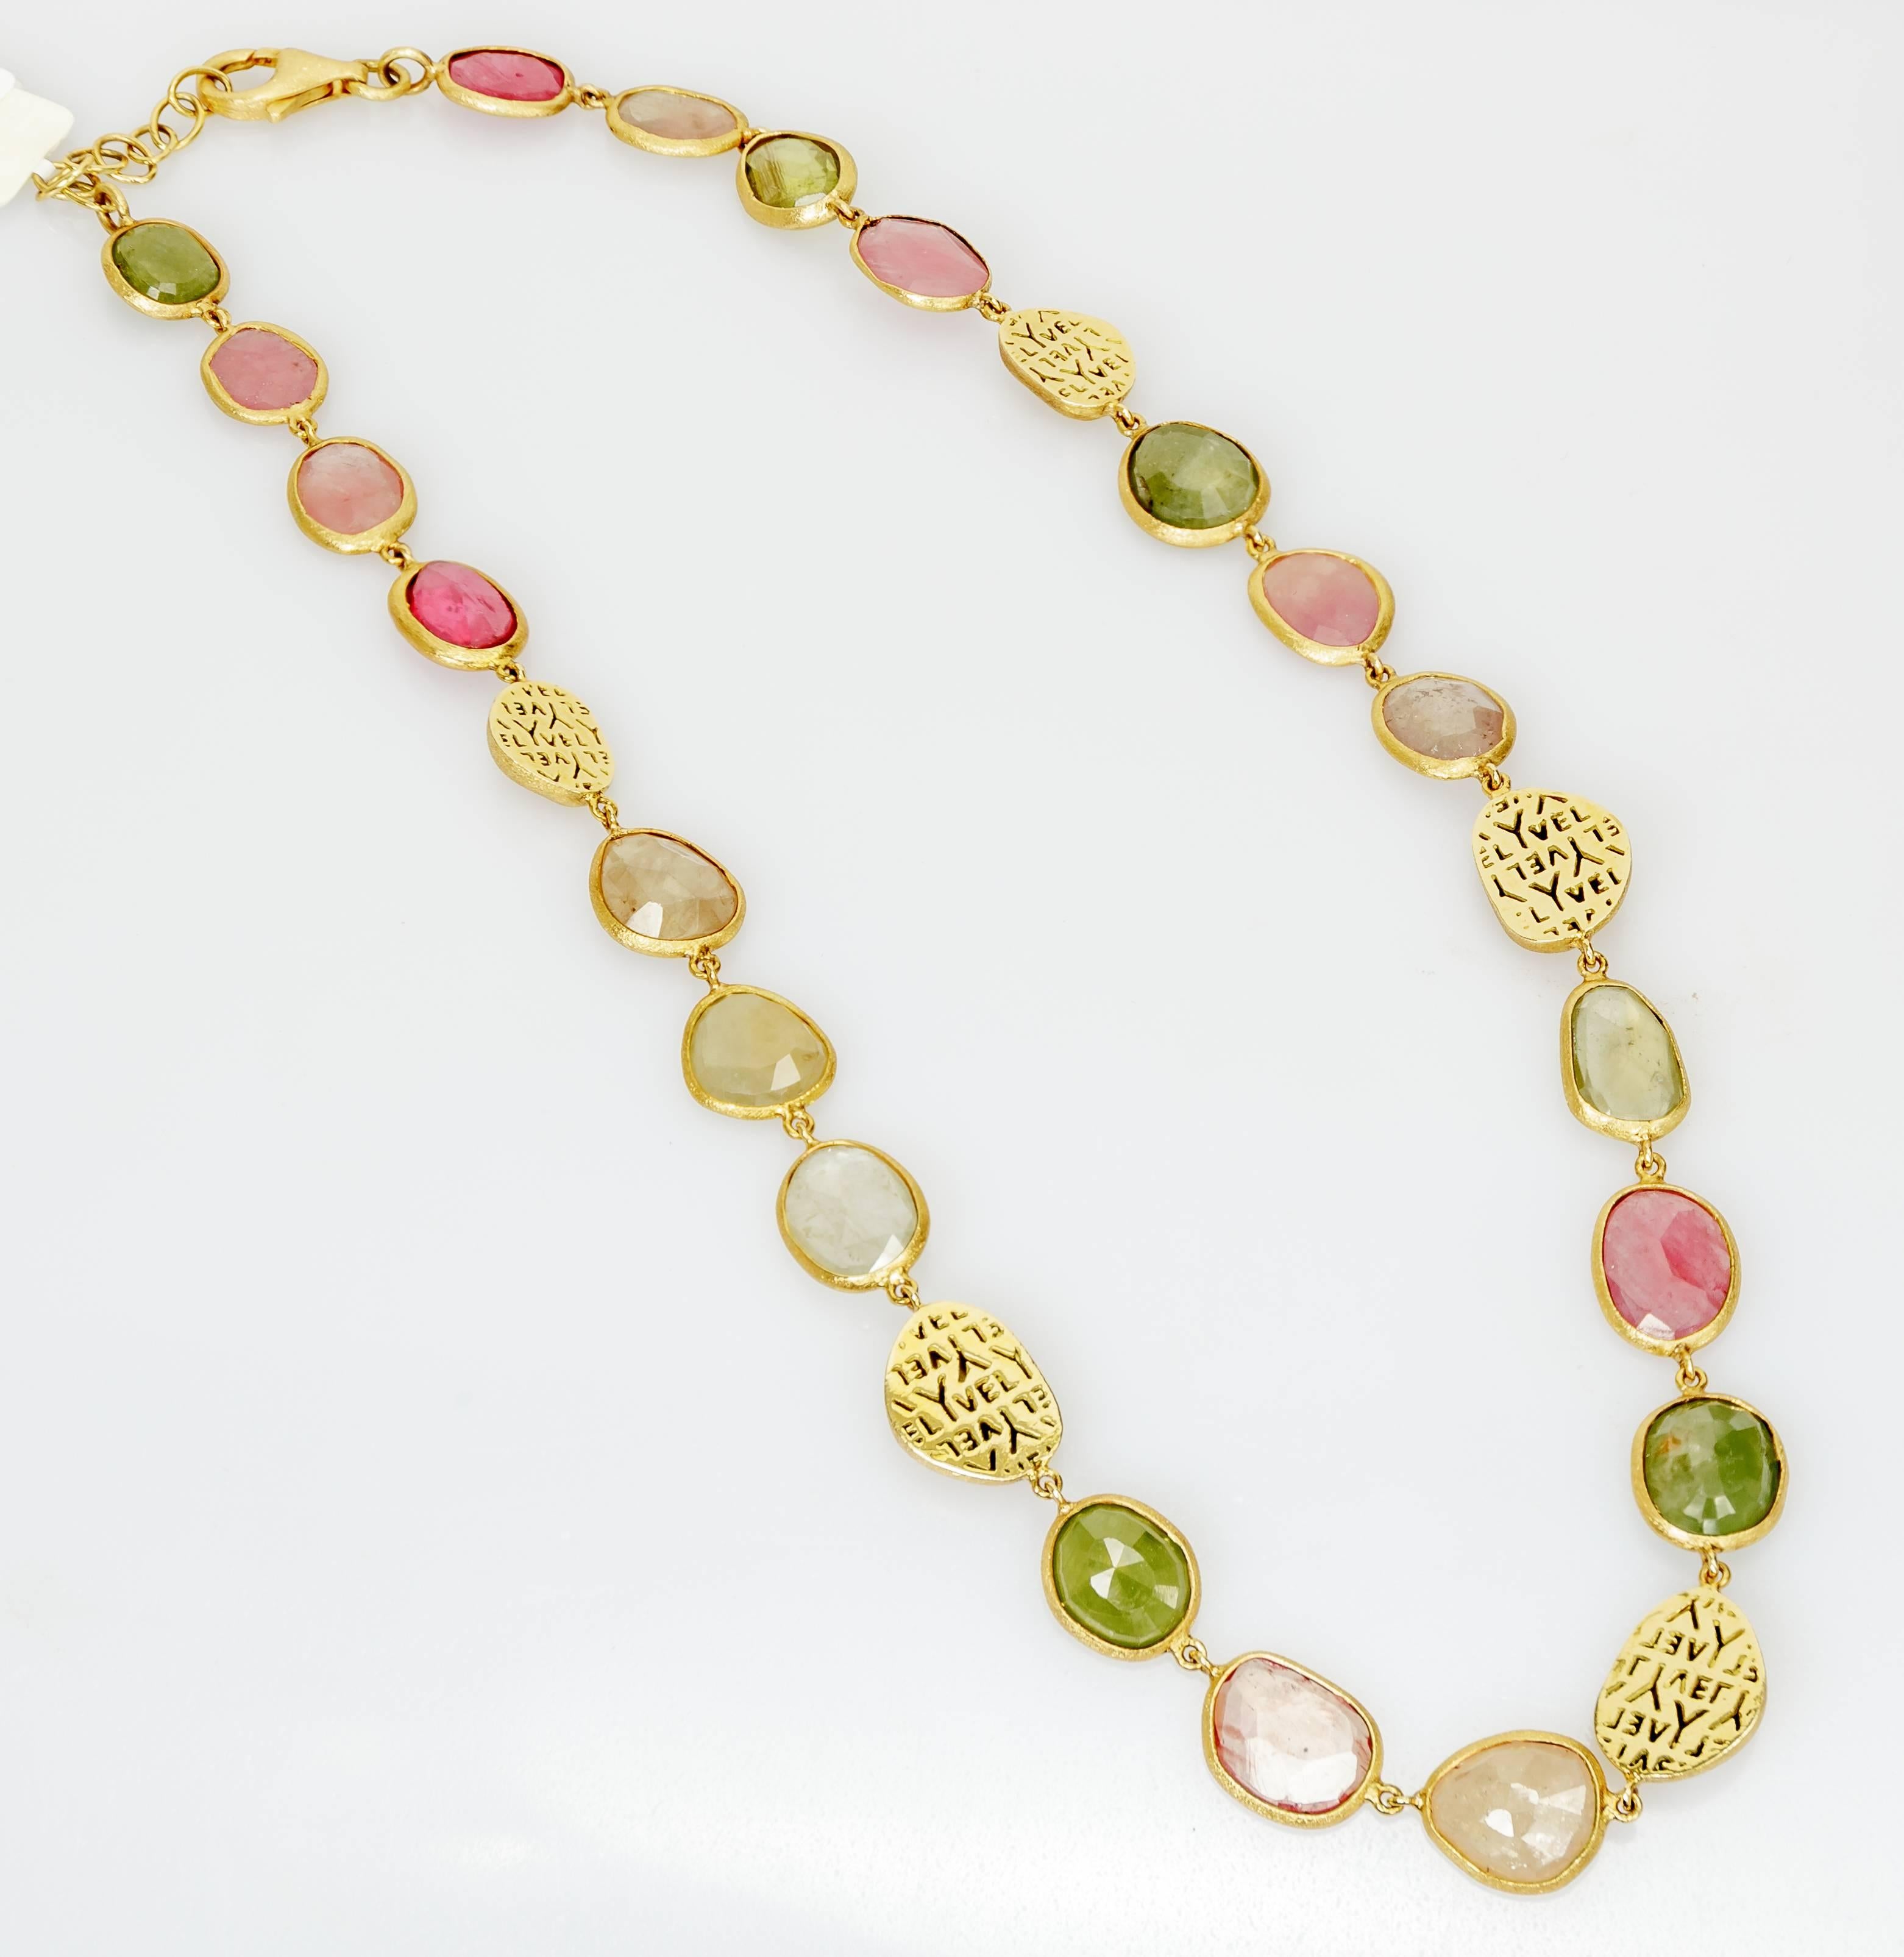 This 18k yellow gold necklace has 20 natural fancy colored faceted sapphires interspersed with gold beads that say Yvel. Reversible. It measure 15 inches. 